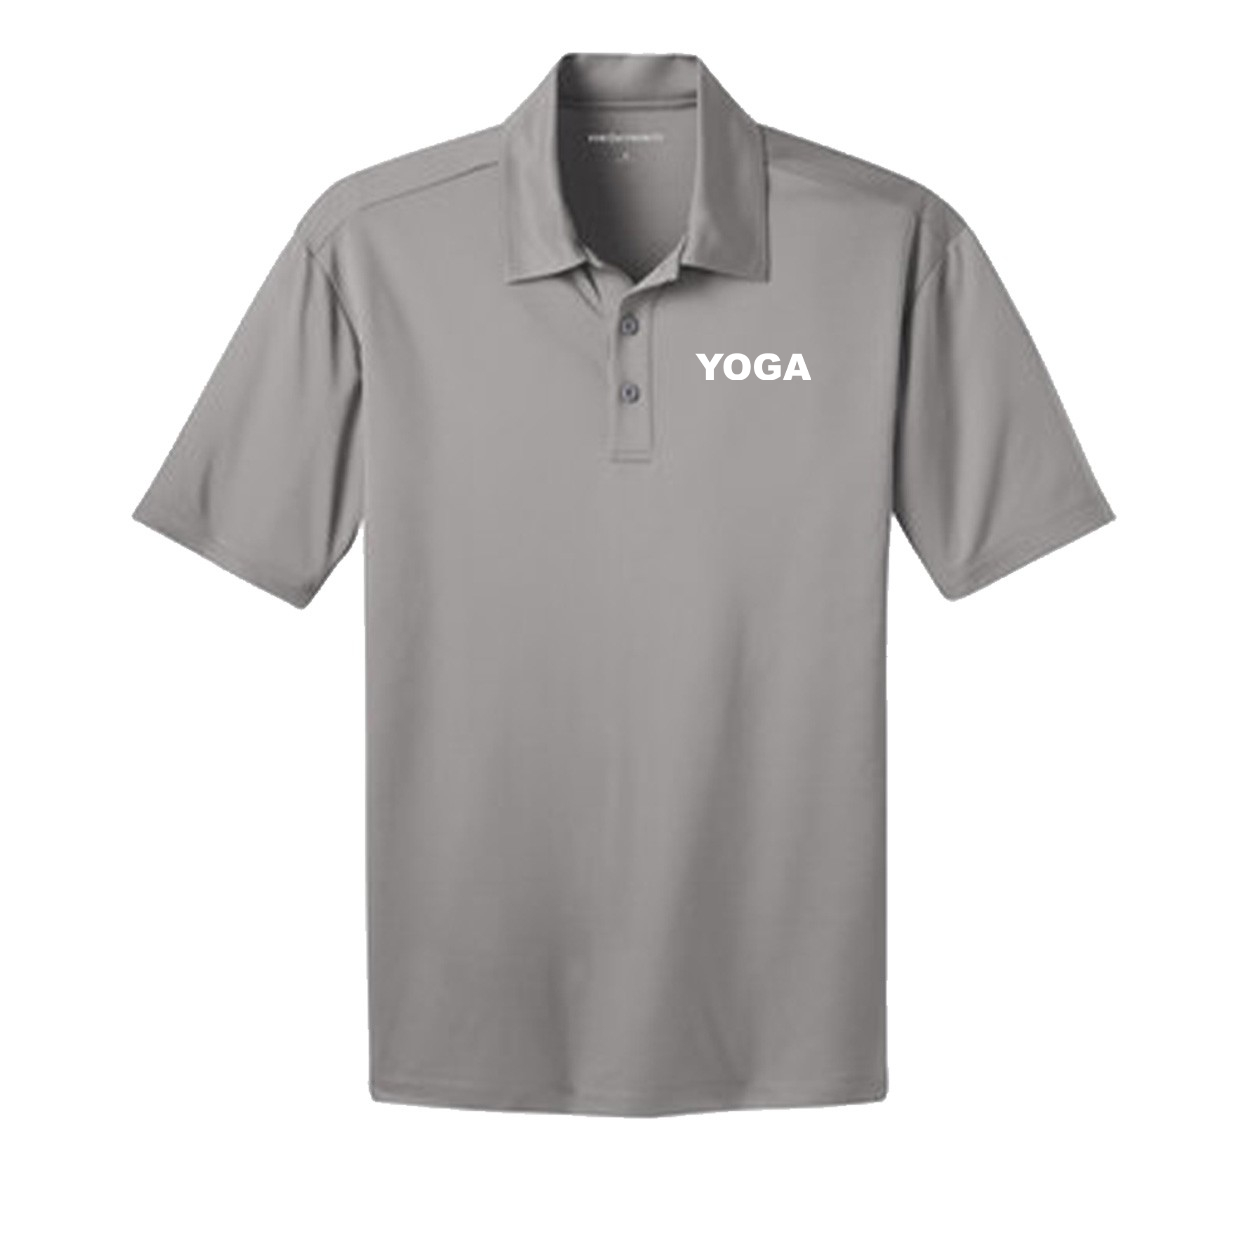 Yoga Brand Logo Night Out Silk Touch Polo Shirt Gusty Gray 